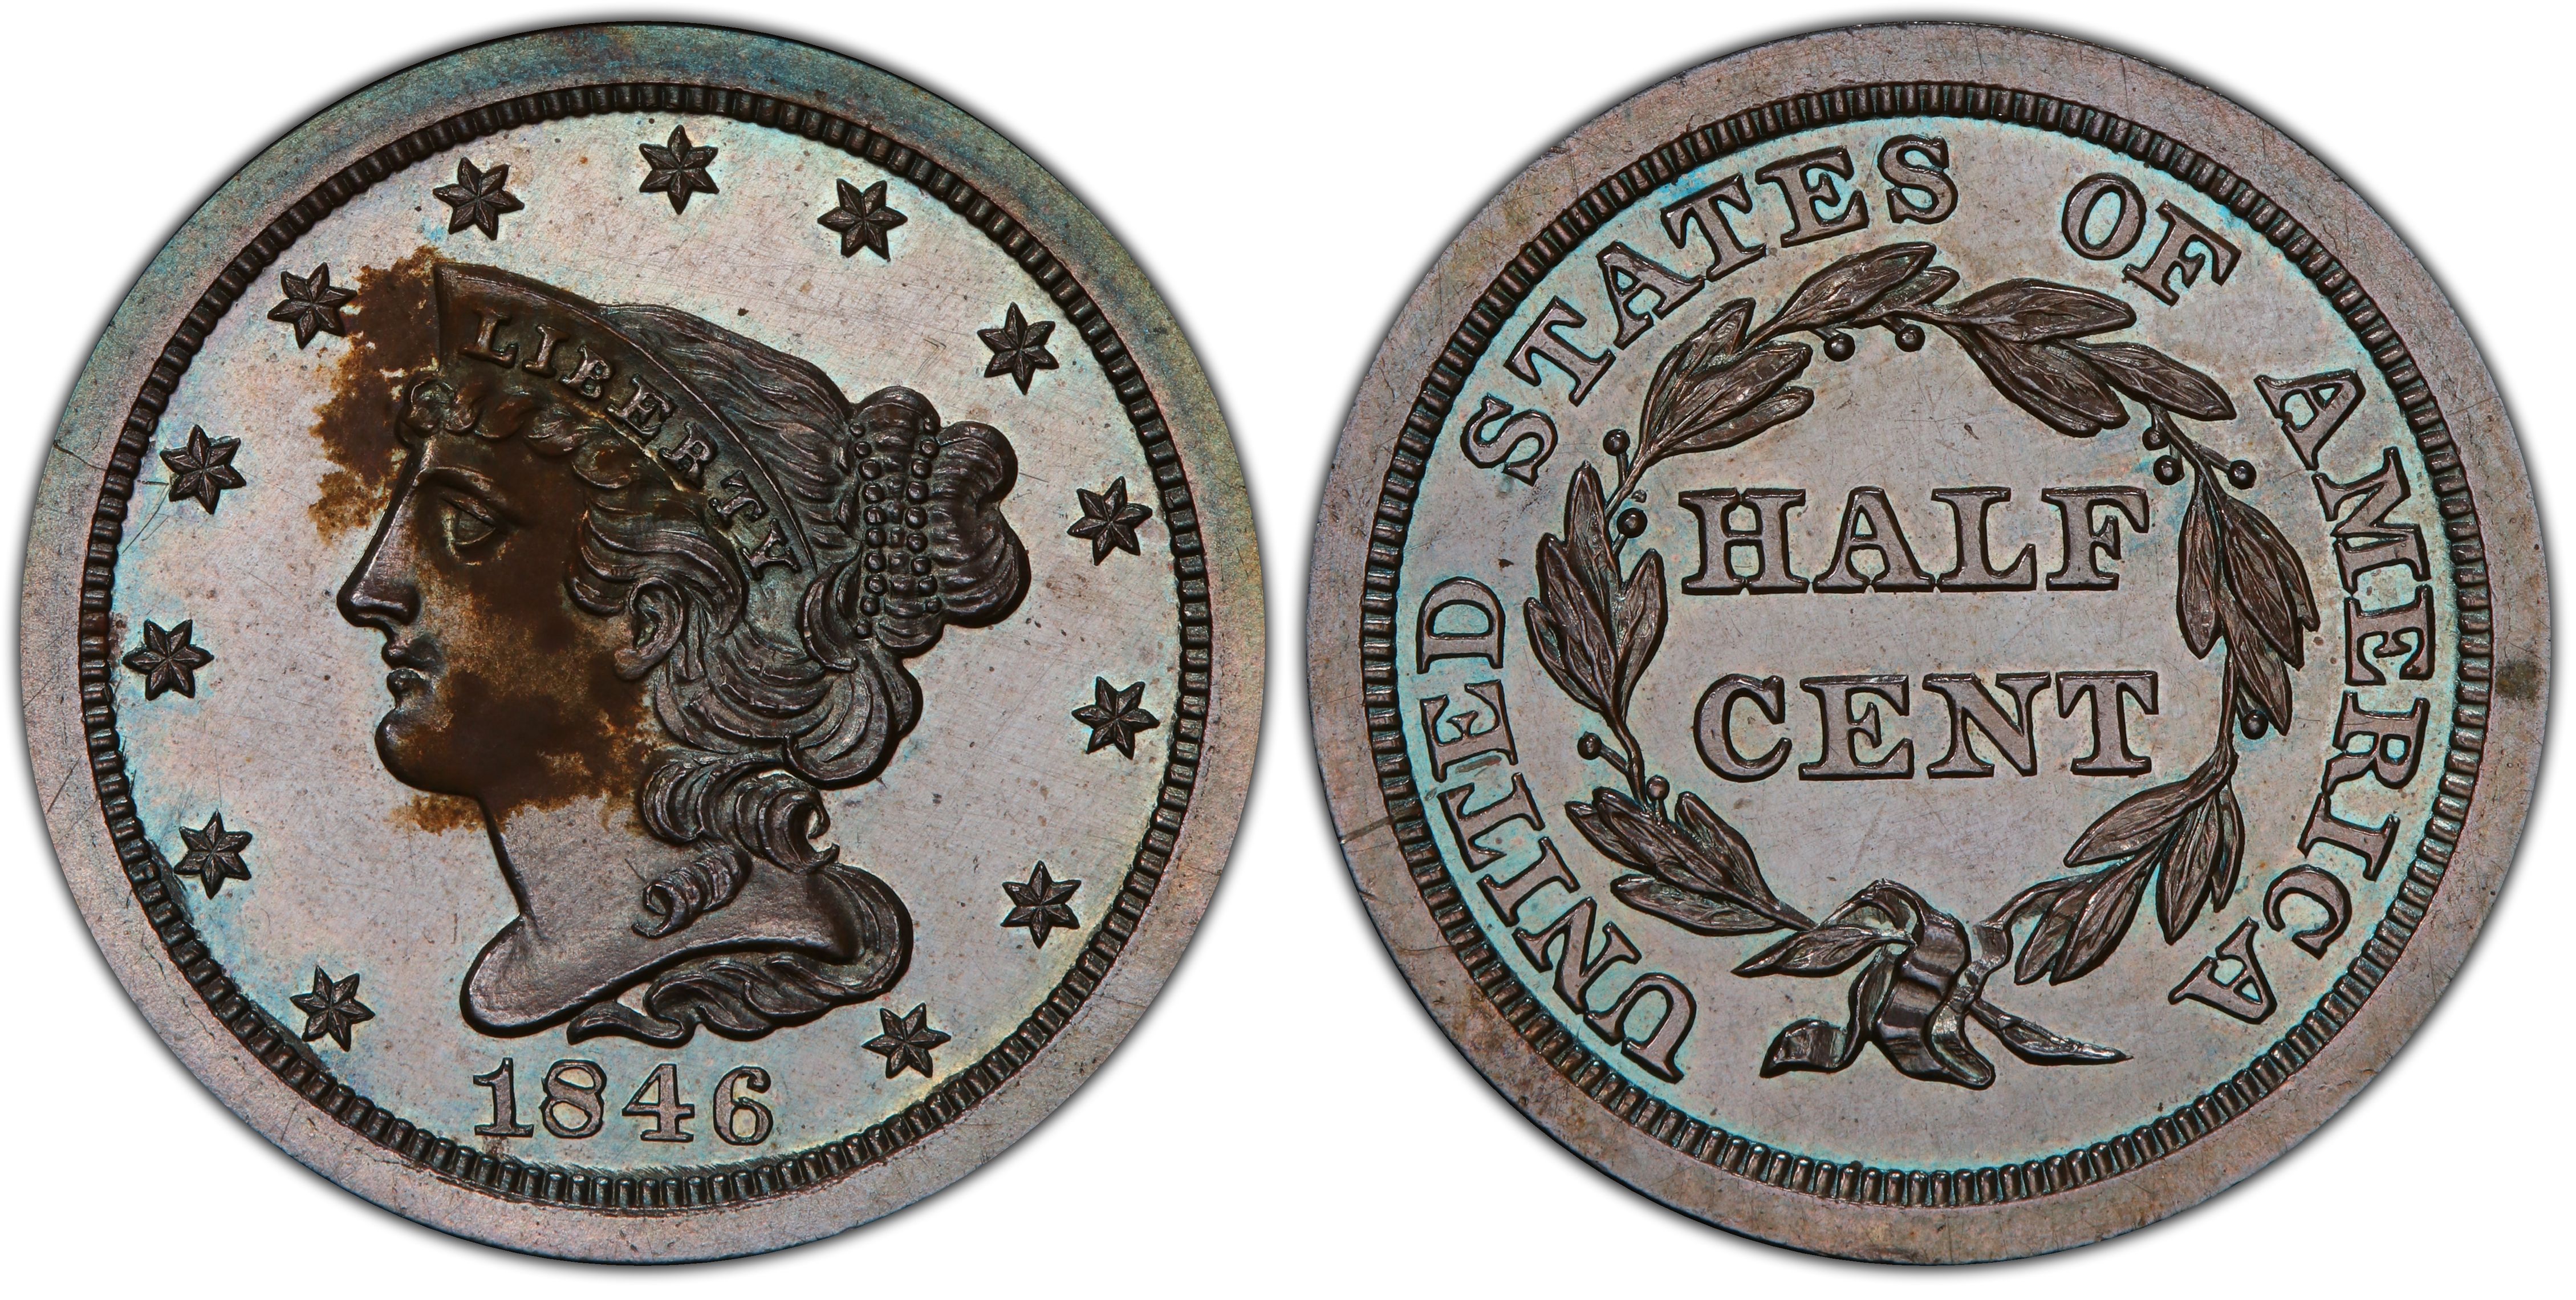 1846 1/2C Original, BN (Proof) Braided Hair Half Cent - PCGS CoinFacts